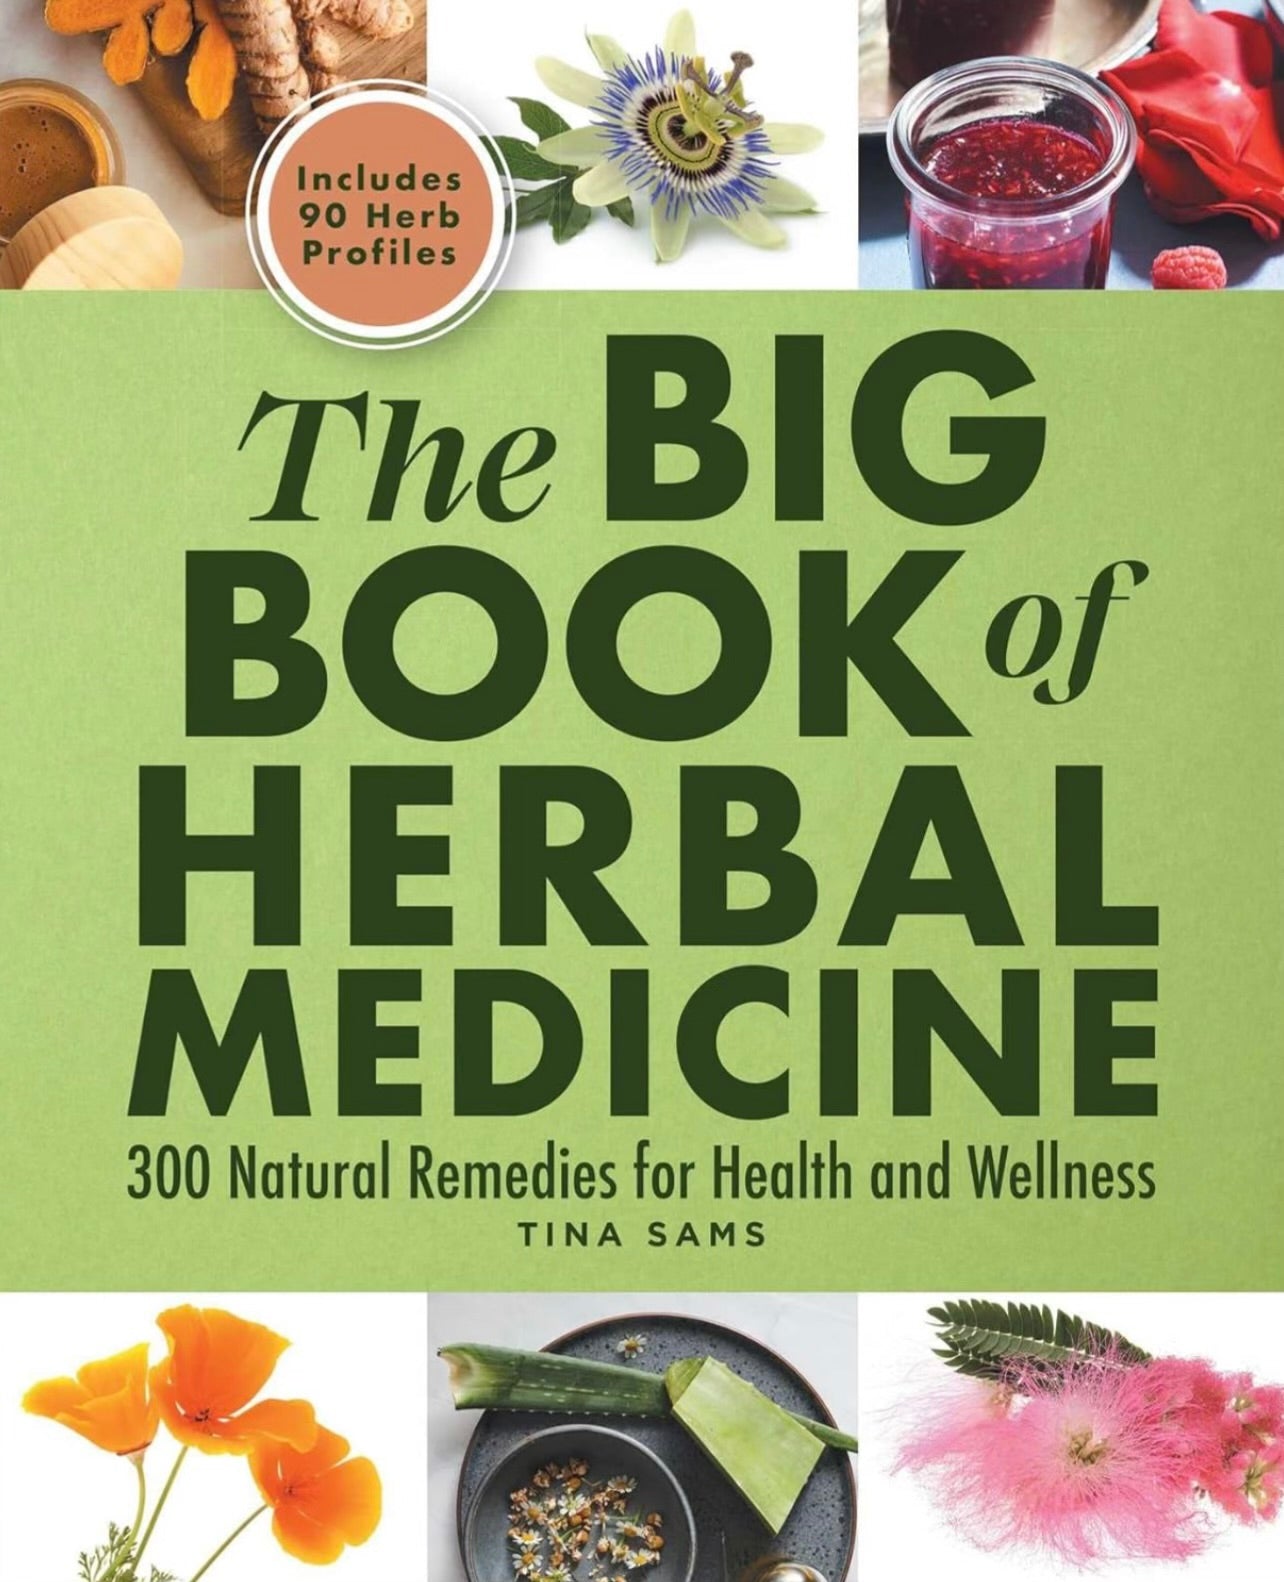 The Big Book of Herbal Remedies 300 Natural Remedies For Health & Wellness by Tina Sams